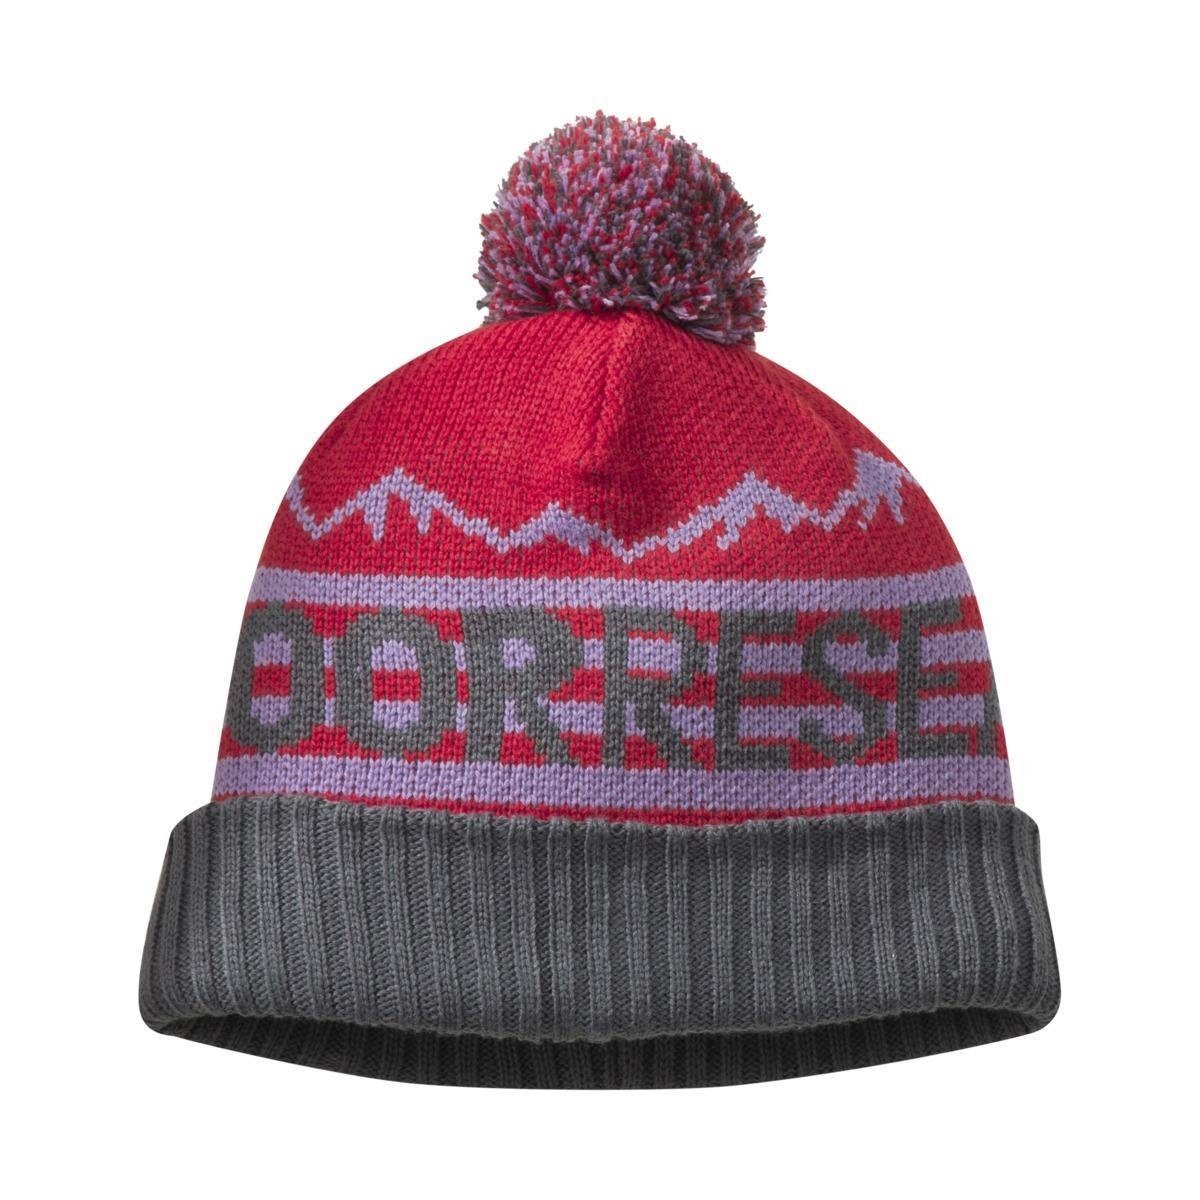 Mainstay Research Beanie Research Beanie Kids' Outdoor Mütze Outdoor